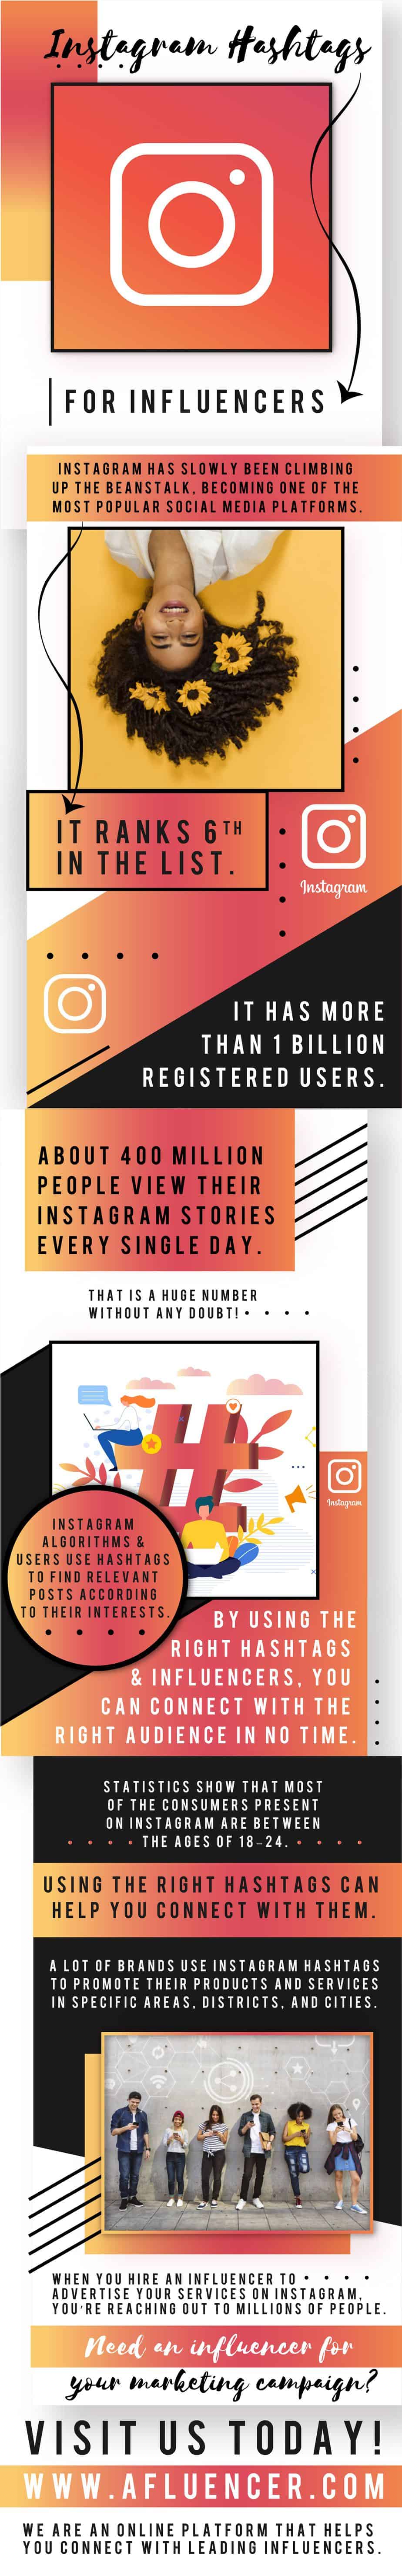 Infographic: Instagram Hashtags for Influencers